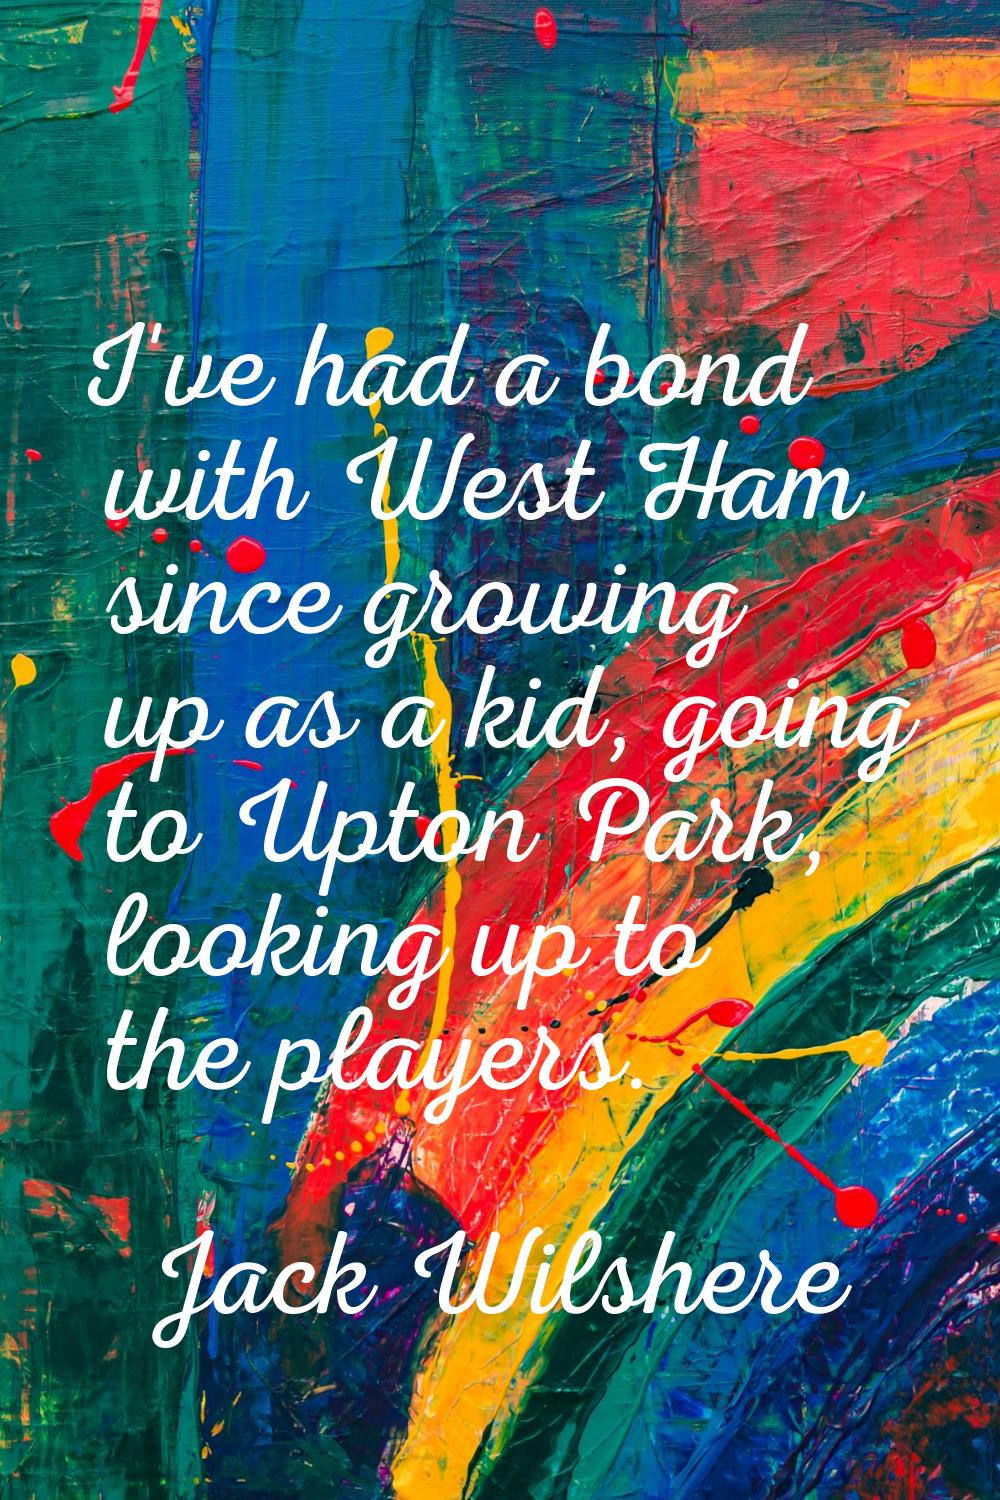 I've had a bond with West Ham since growing up as a kid, going to Upton Park, looking up to the pla